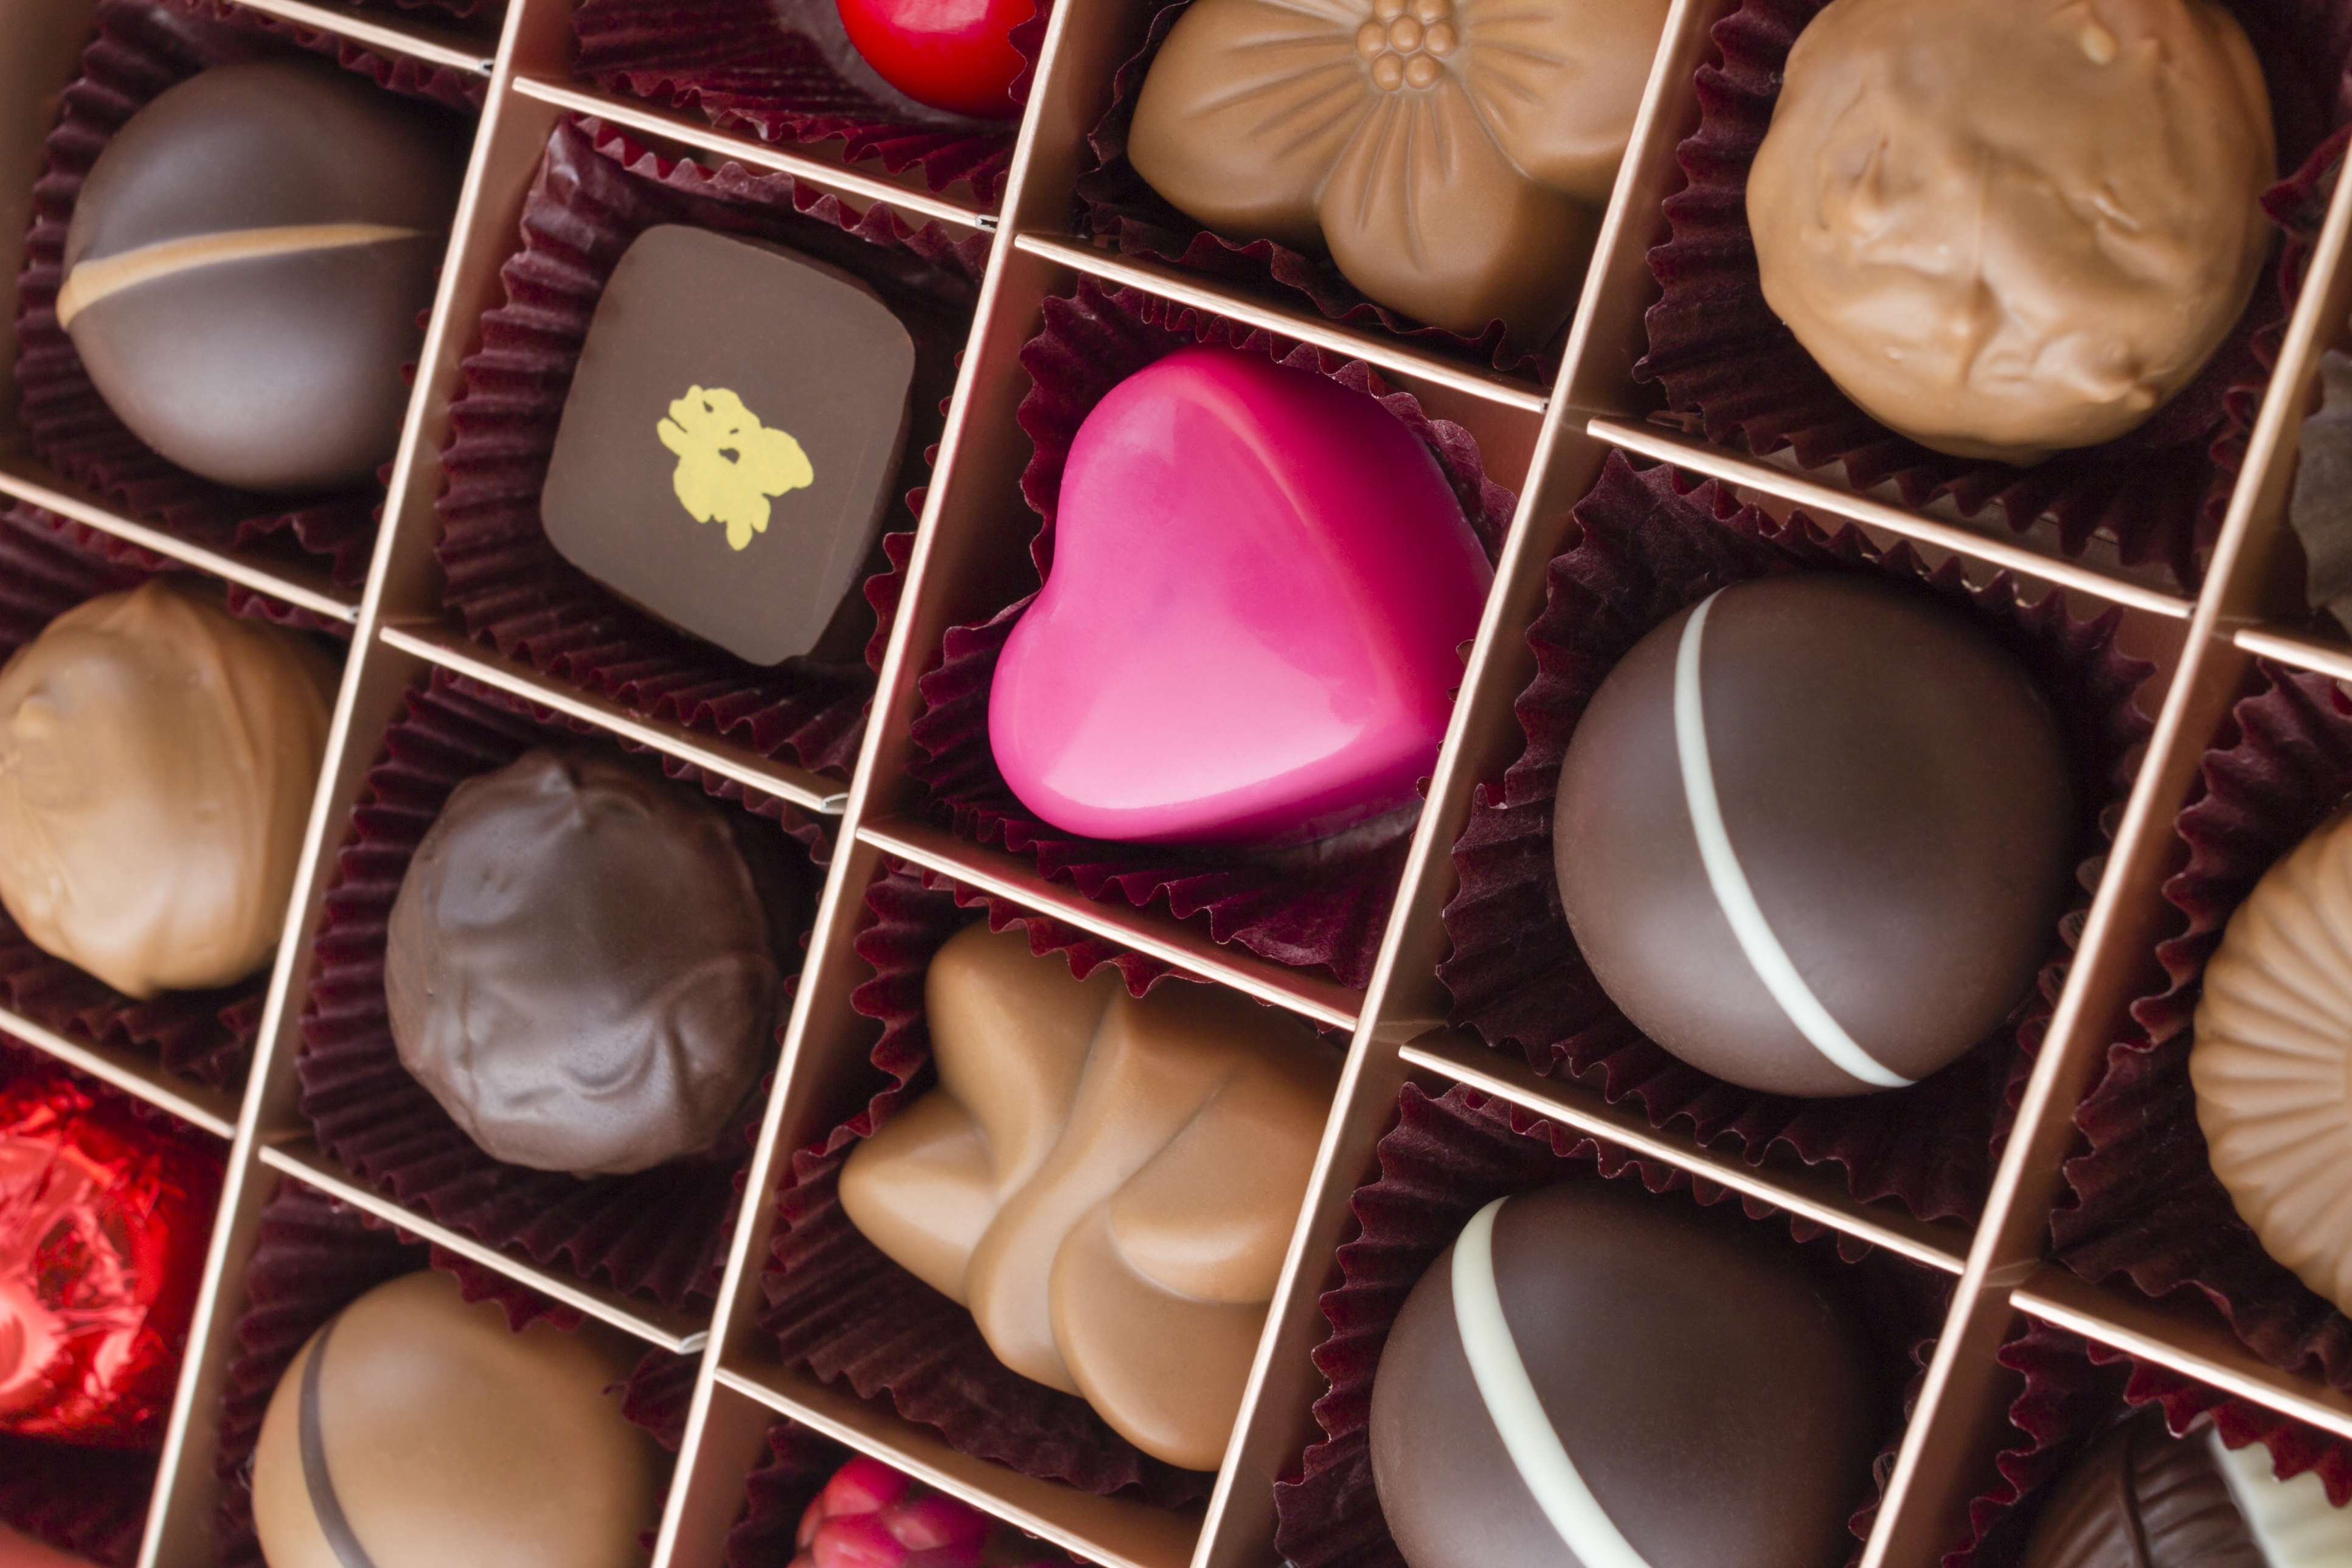 Chocolate can help ease stress